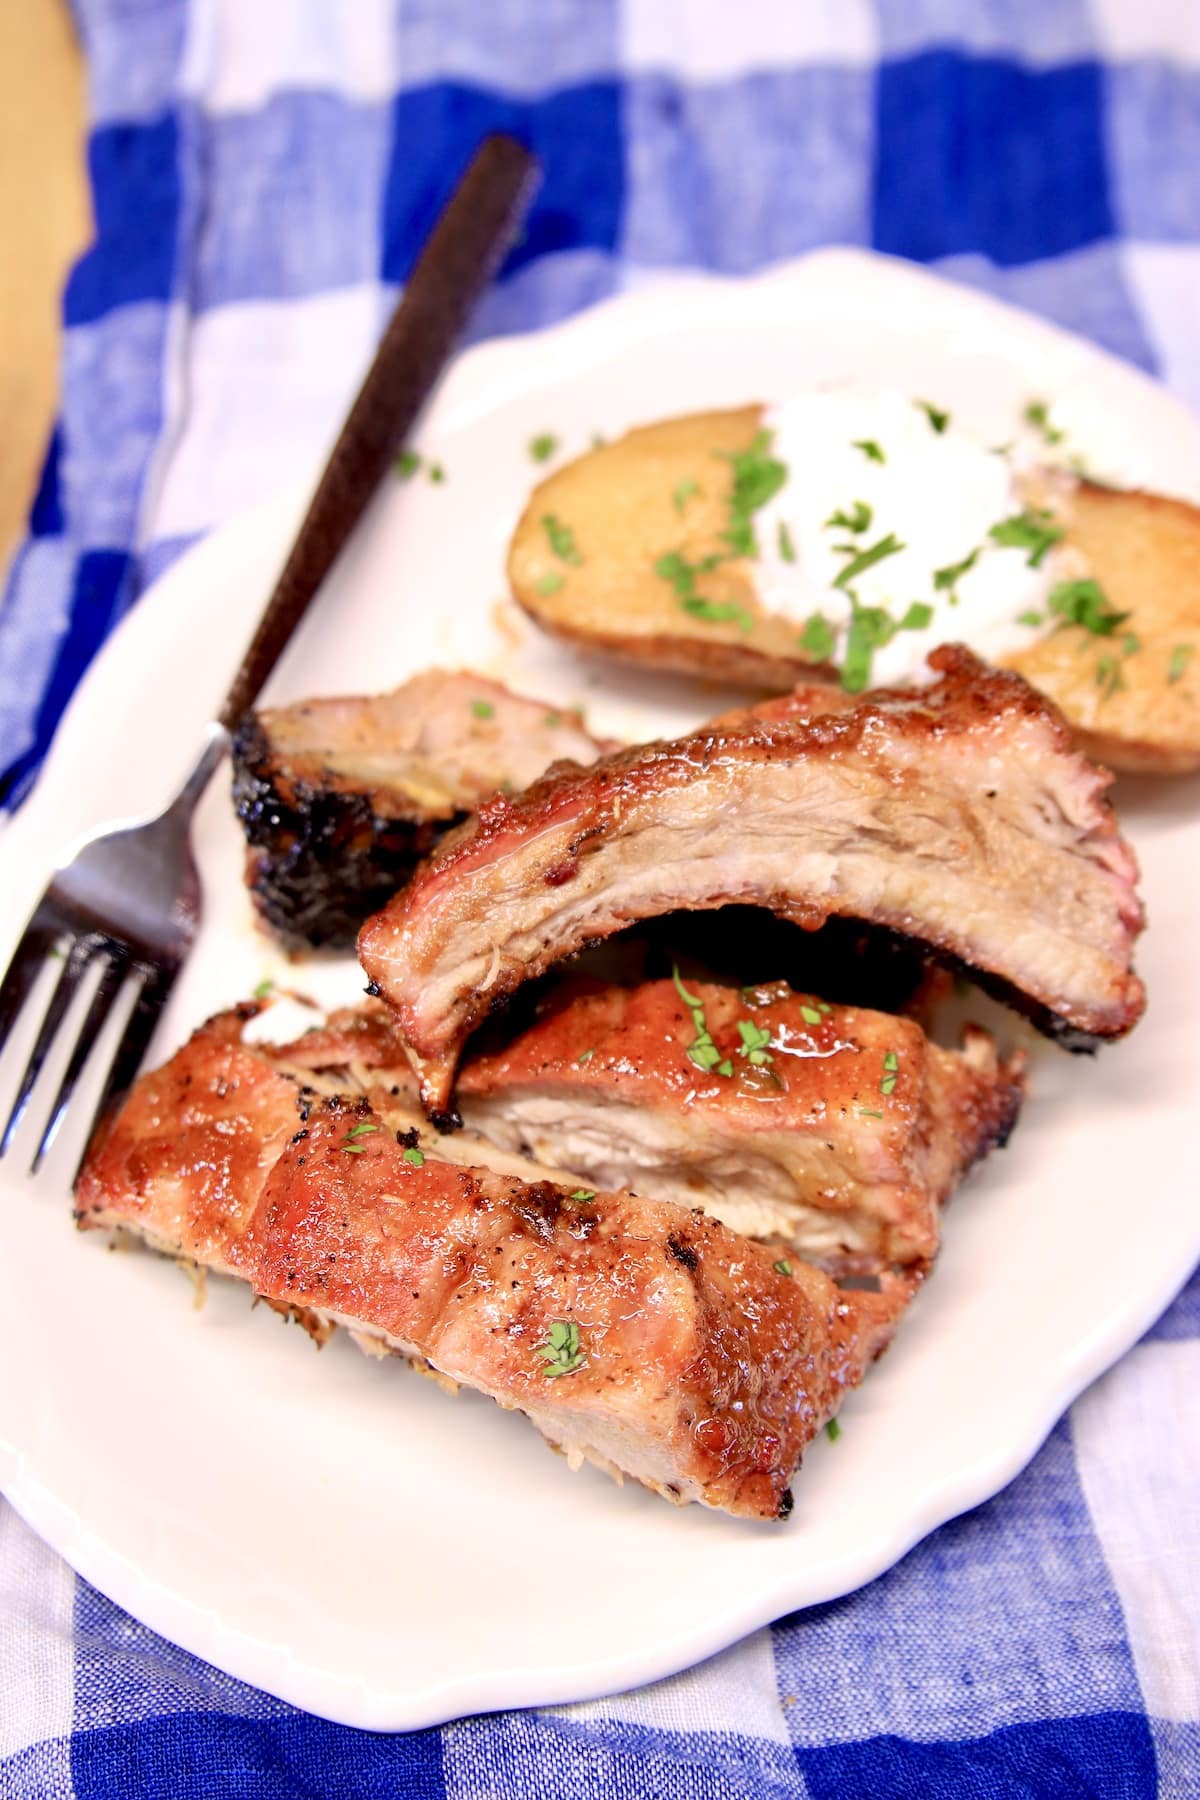 Plate with 3 baby back ribs, baked potato with sour cream.